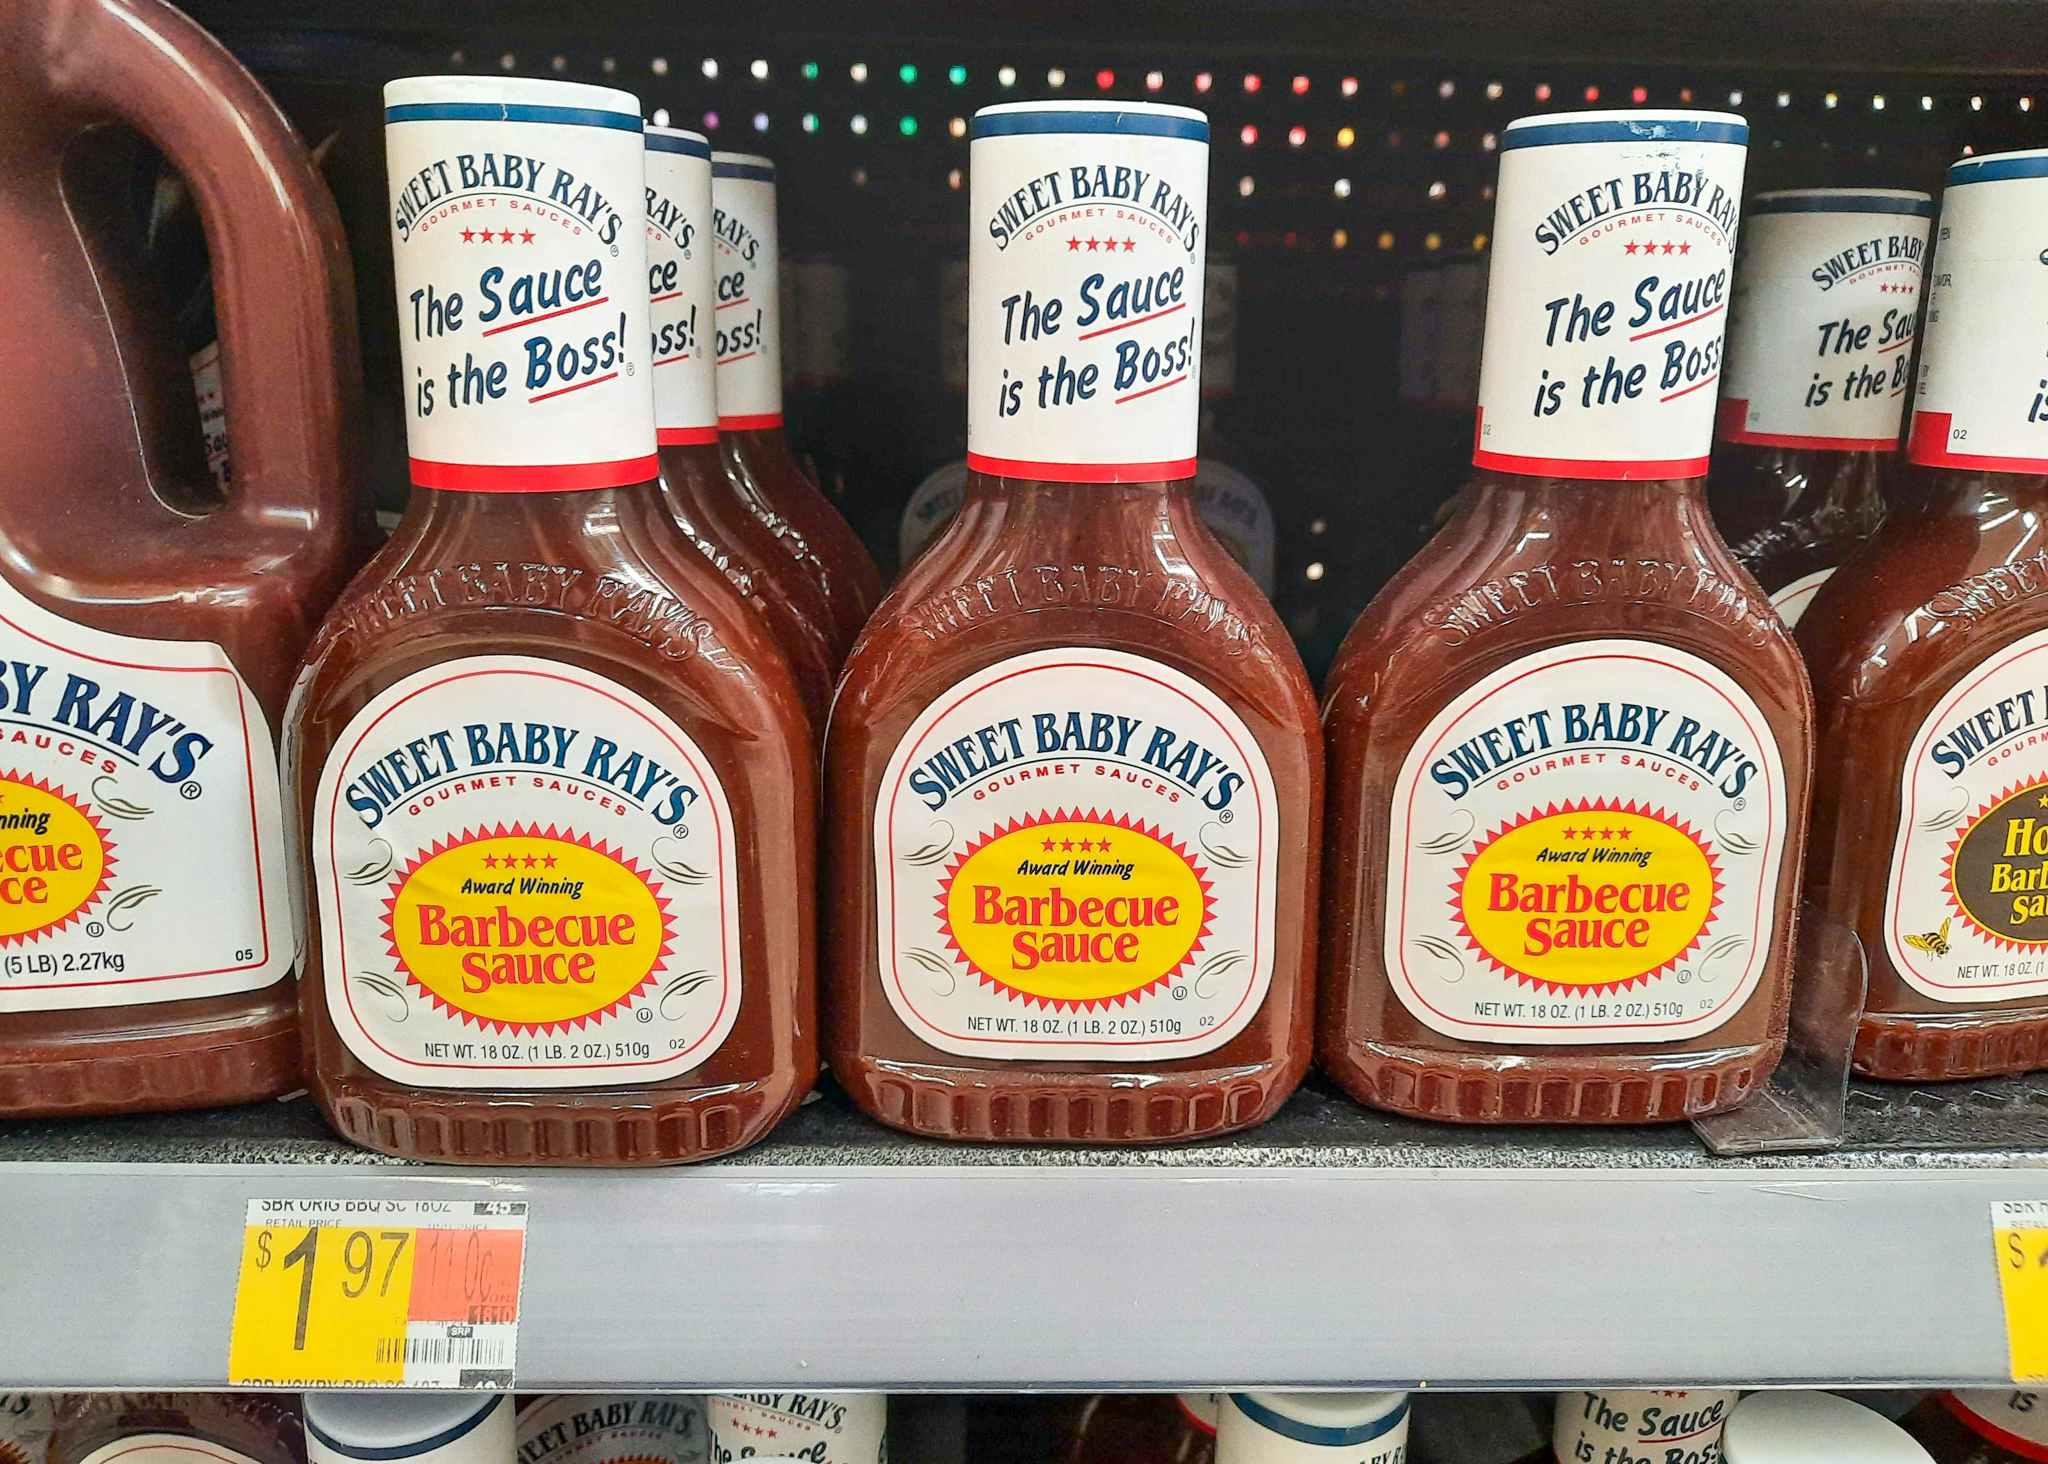 Sweet Baby Rays Barbecue Sauce on display at Walmart